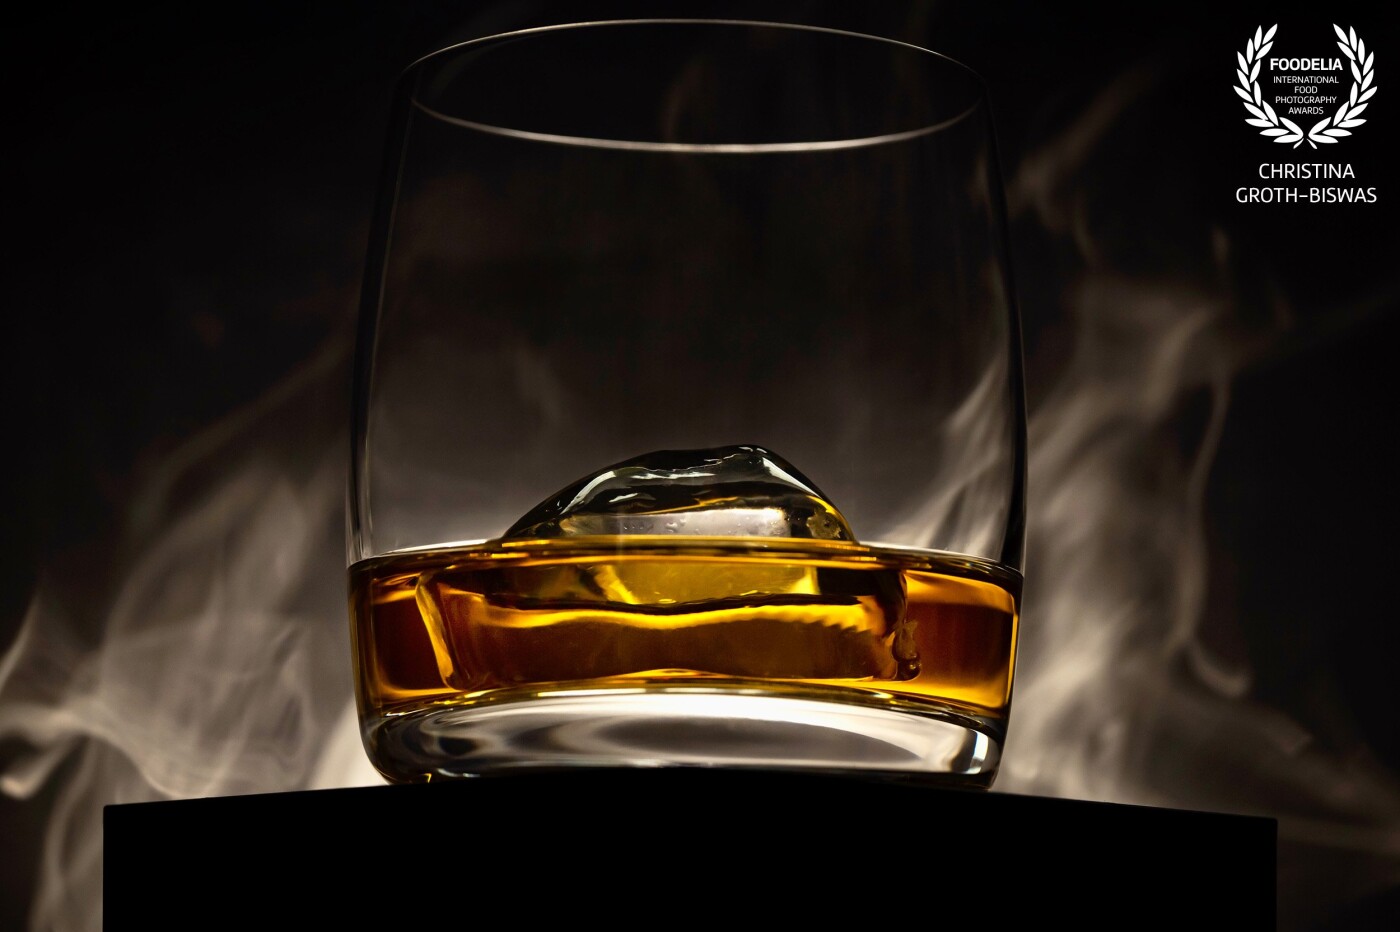 Scotch on the rocks. I was playing with light and smoke here. Since it was a little too early in the day to actually drink it,  it wasn’t wasted but used to deglaze a pan while making a delicious cassoulet de canard.